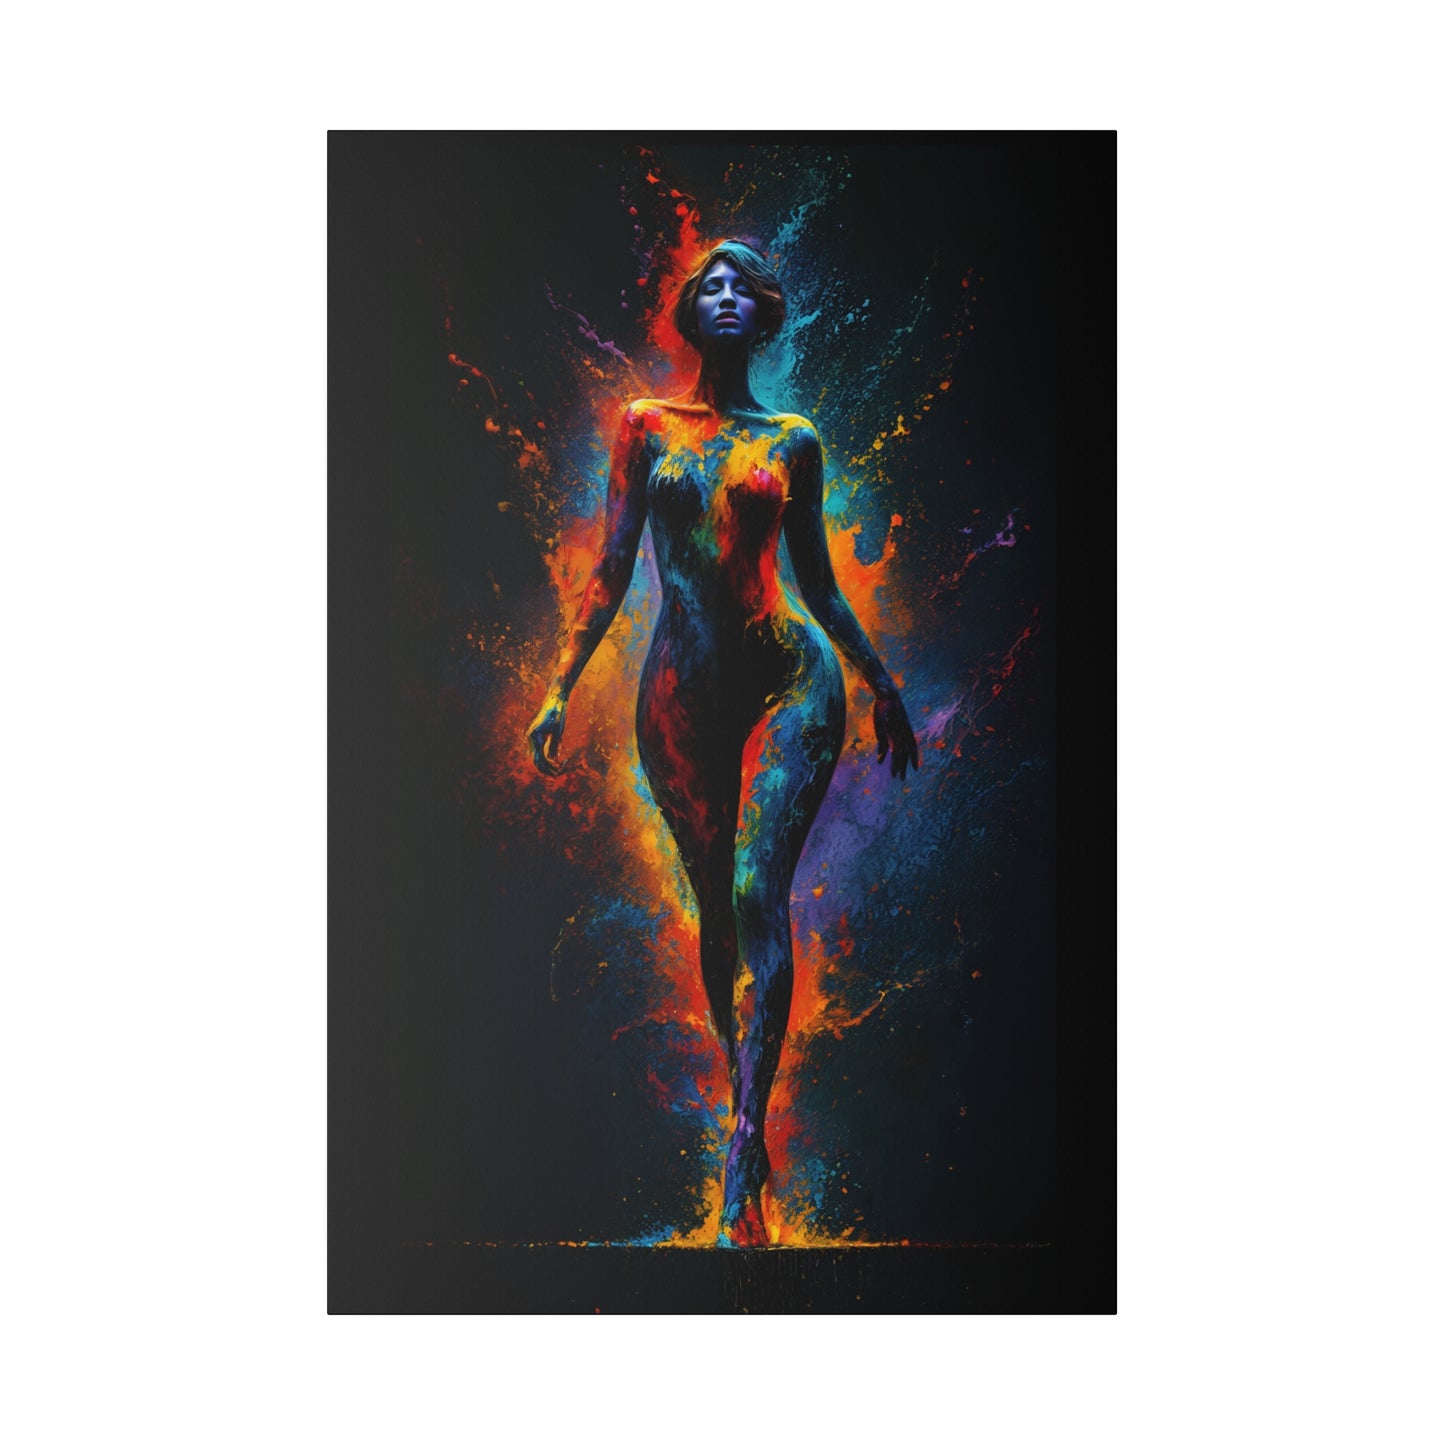 Cosmic Essence Abstract Art, Vivid Spectrum Body Form, Dynamic Color Explosion Canvas Print, Ethereal Female Silhouette Wall Art